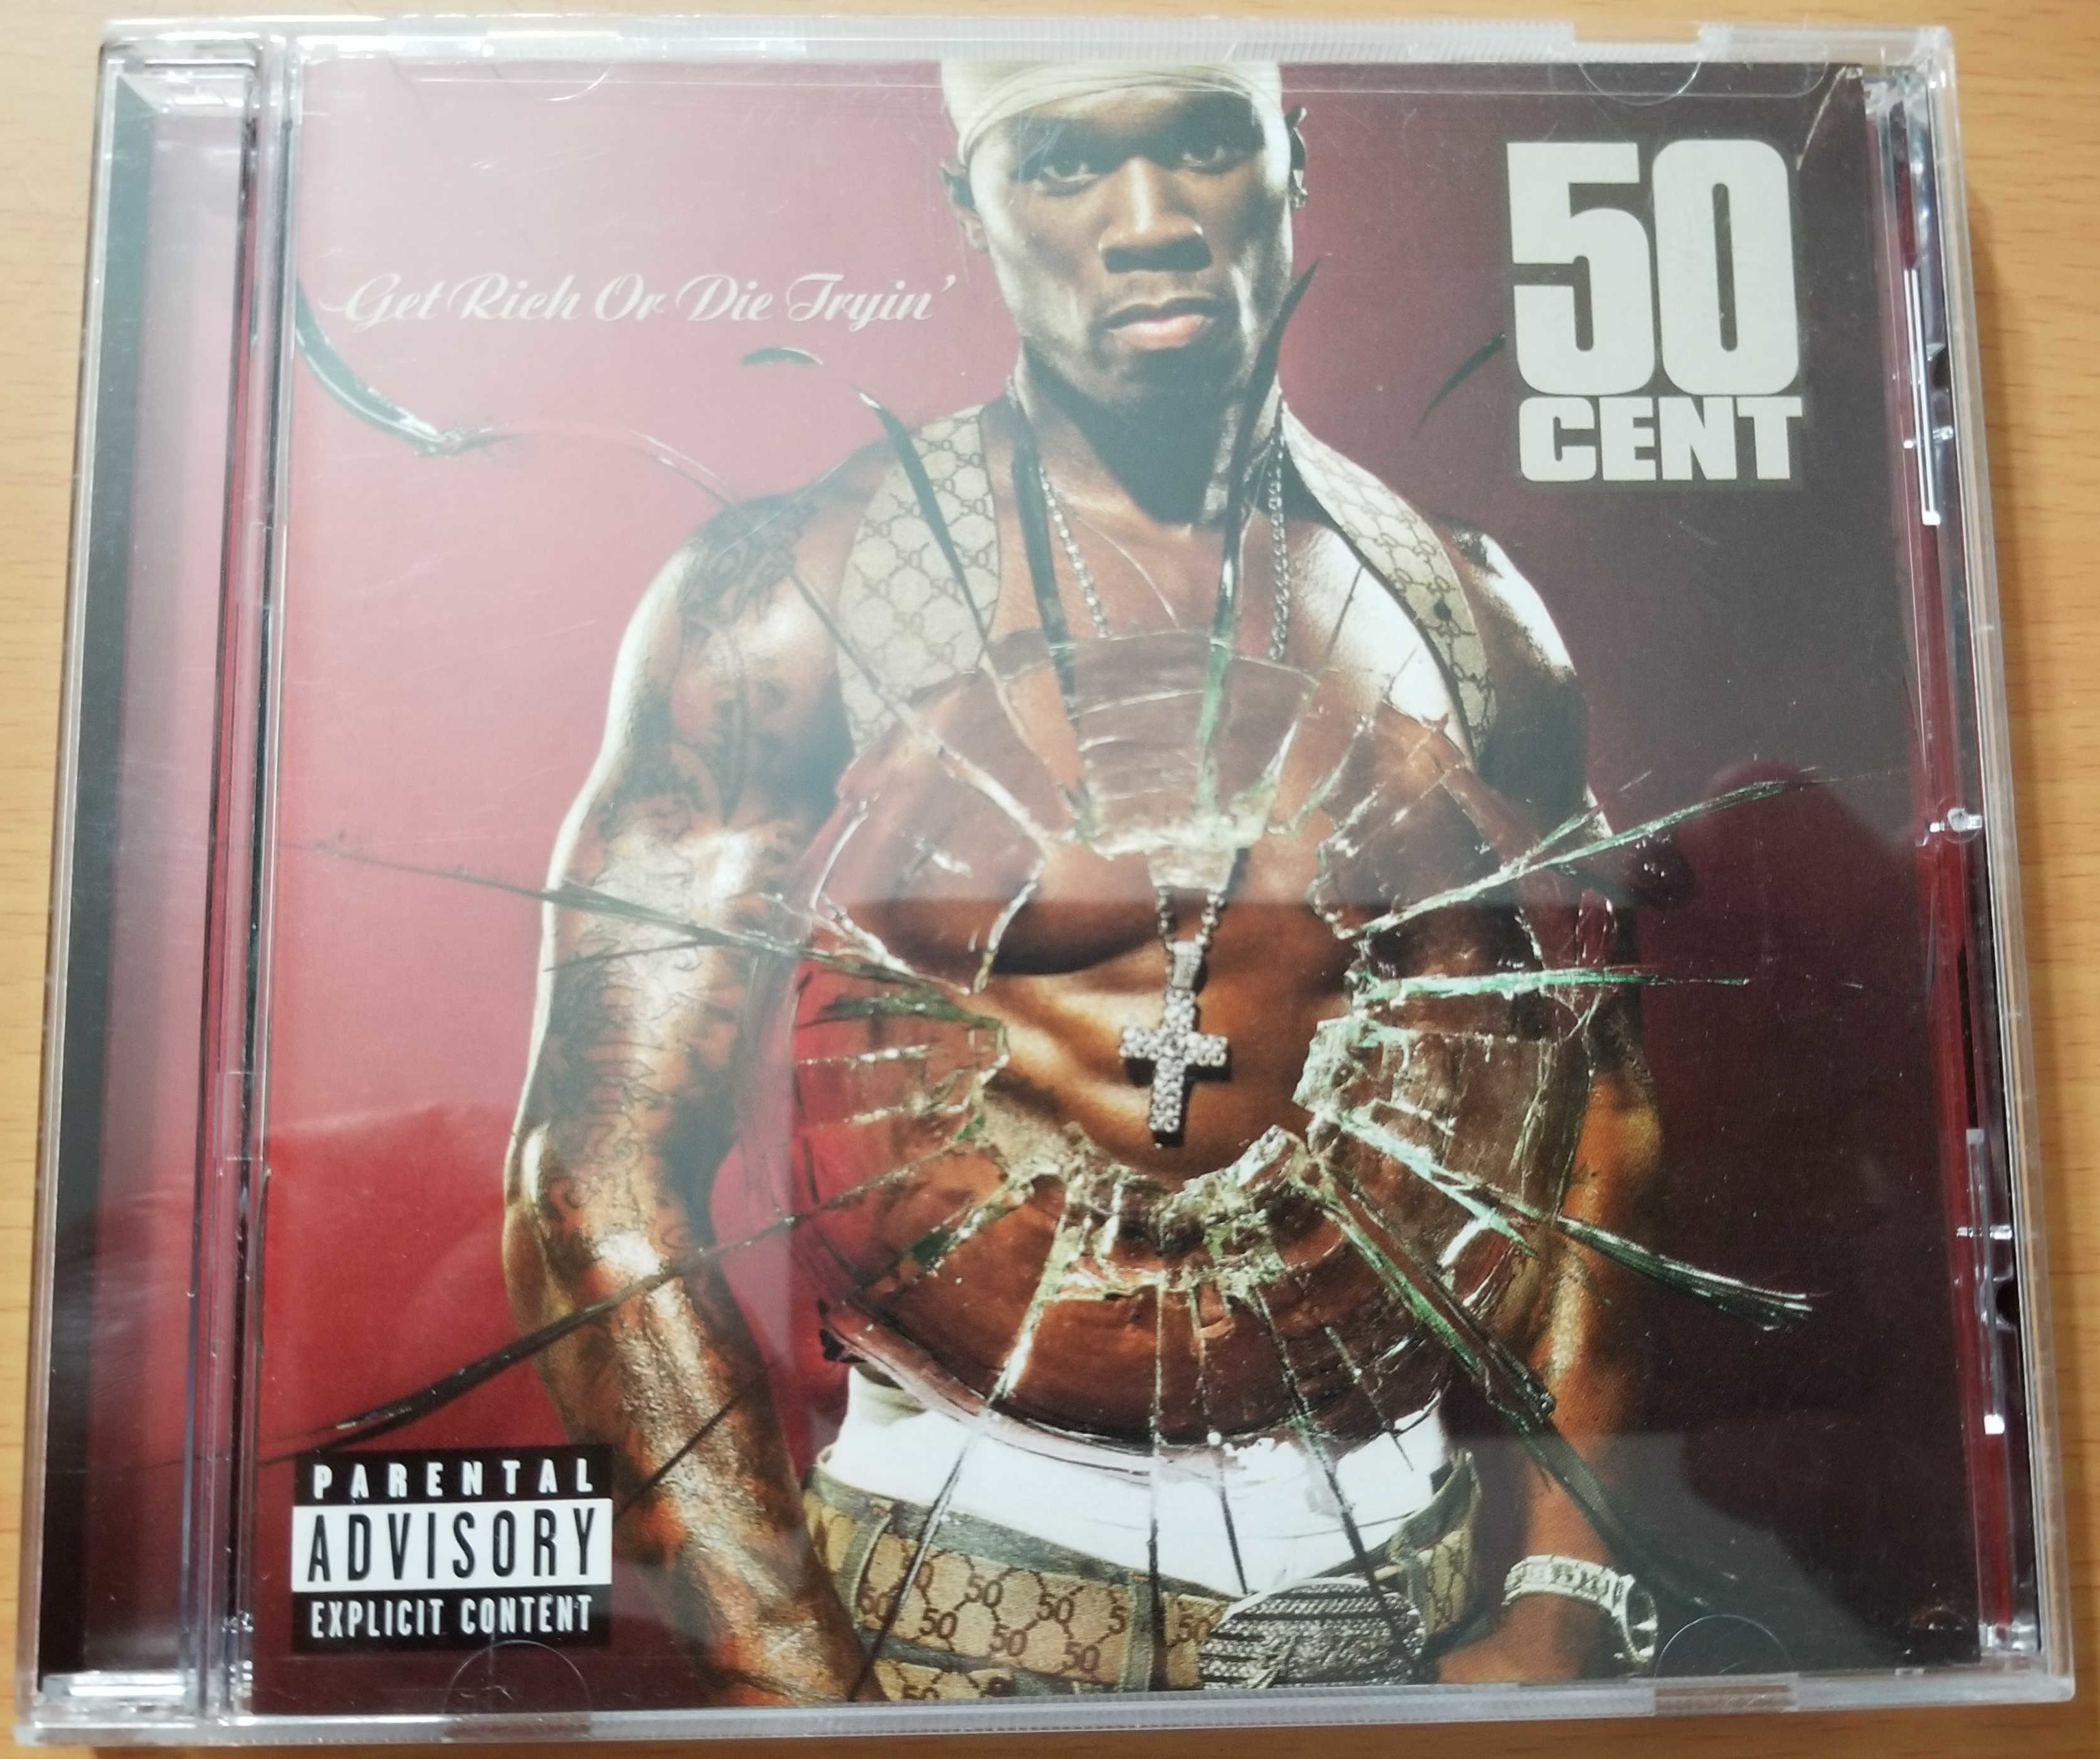 Top 97+ Images 50 cent get rich or die tryin cd Full HD, 2k, 4k